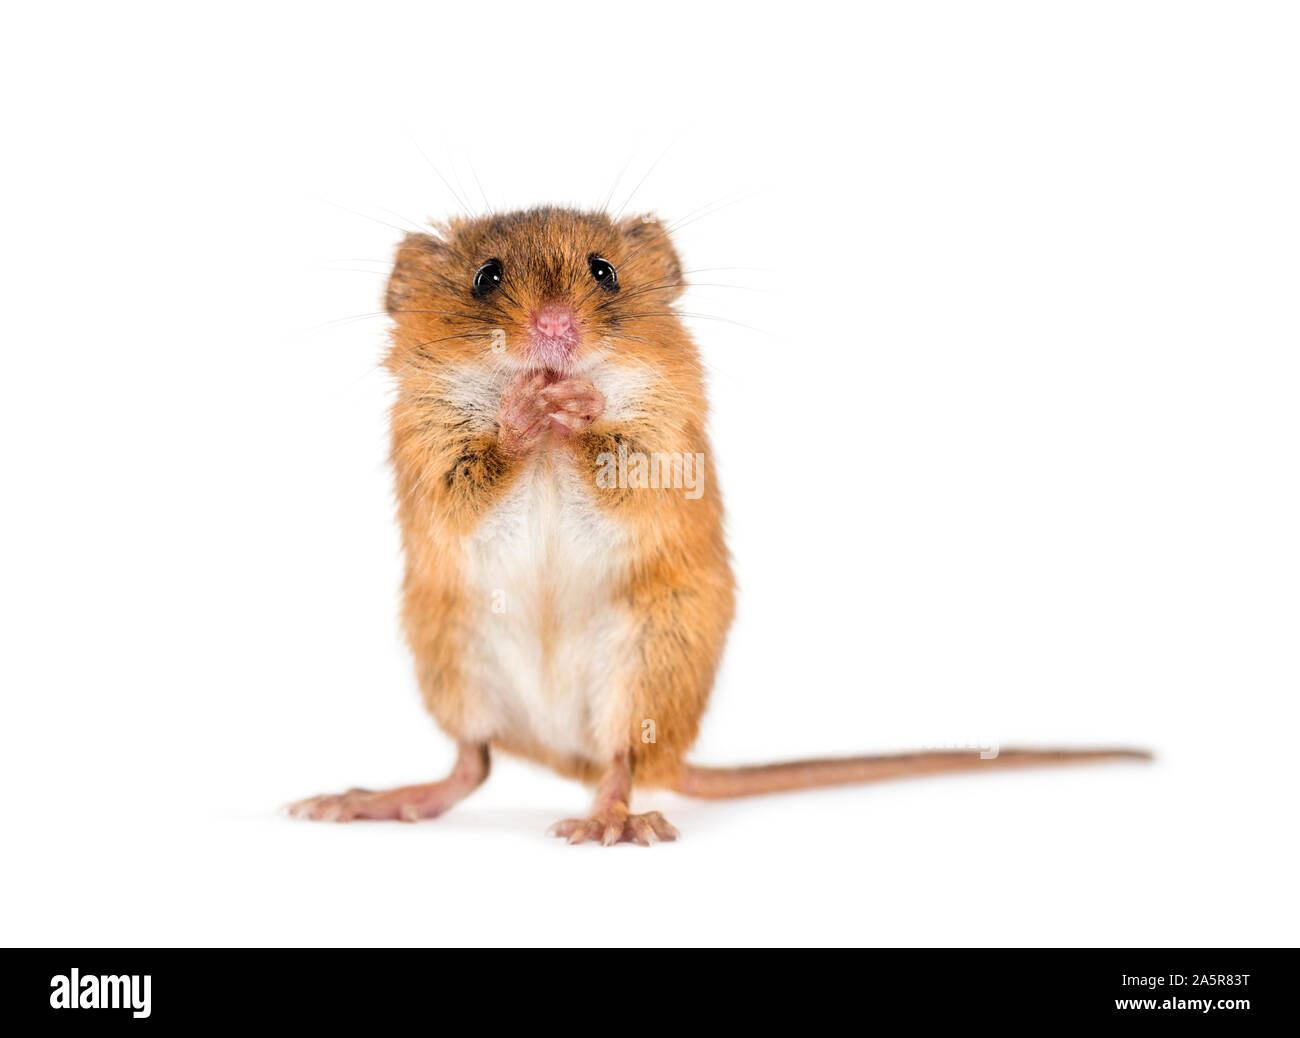 Eurasian harvest mouse, Micromys minutus, grooming in front of white background Stock Photo